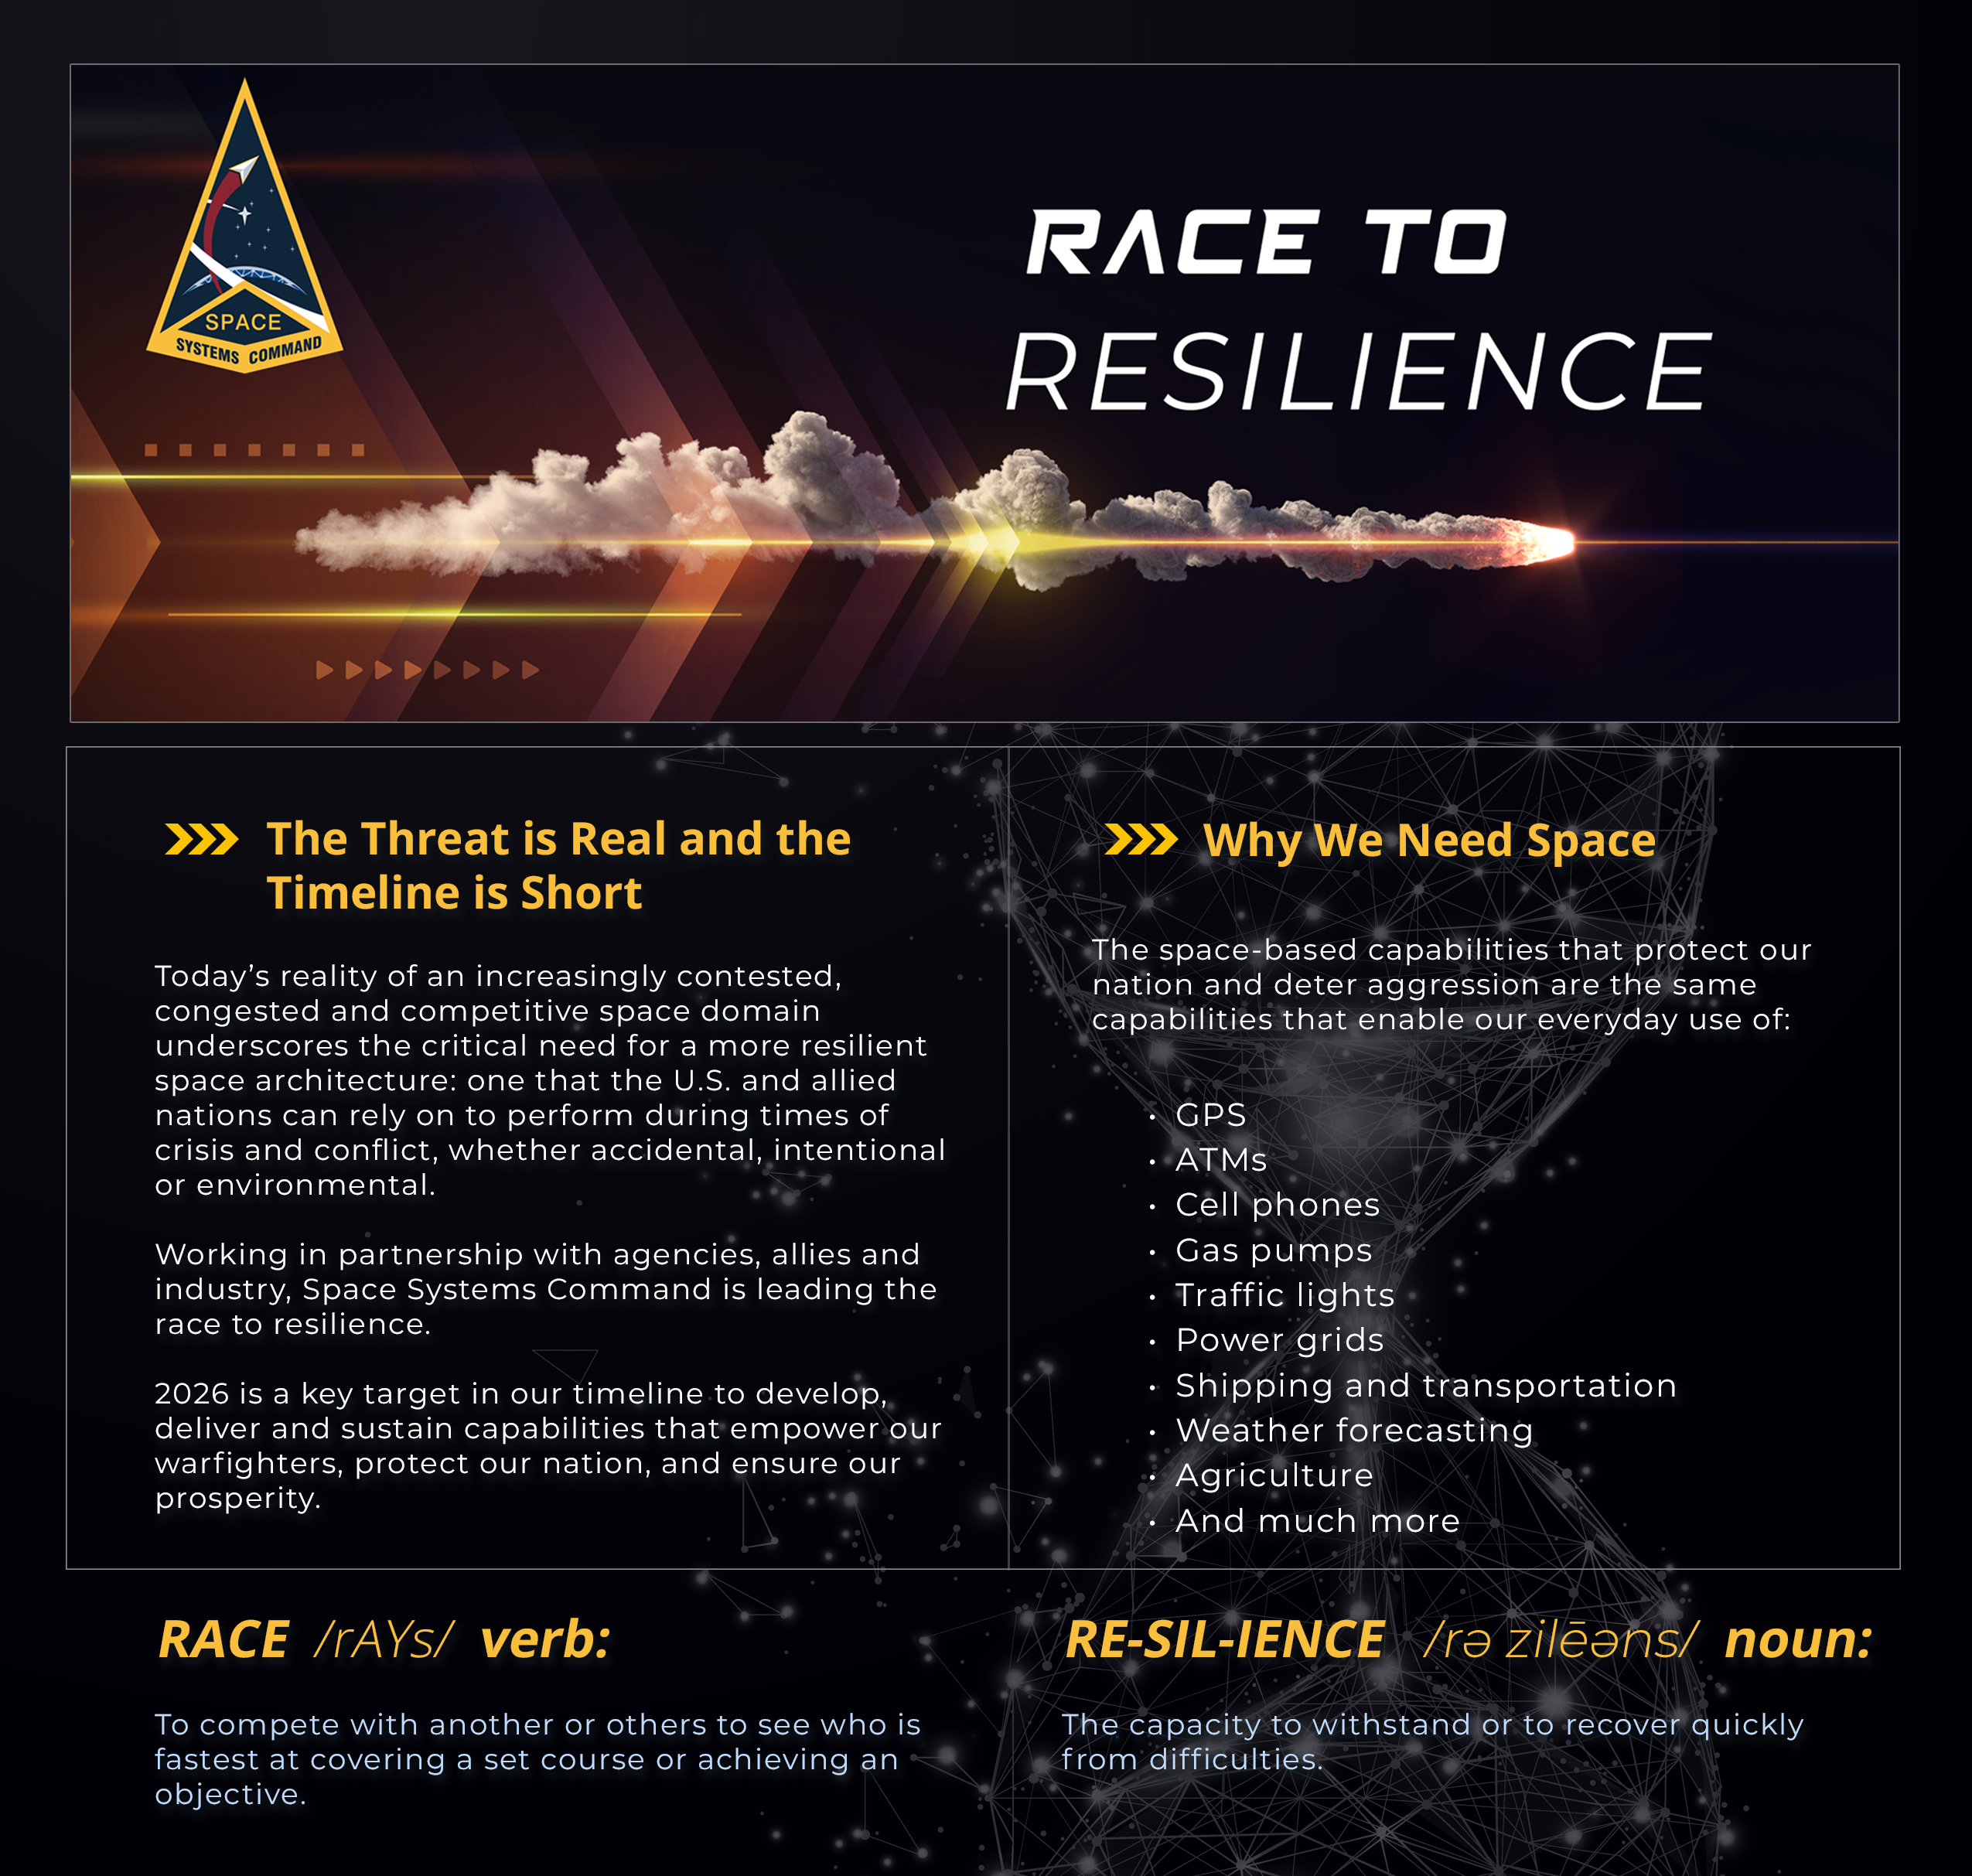 Race to resilience graphic